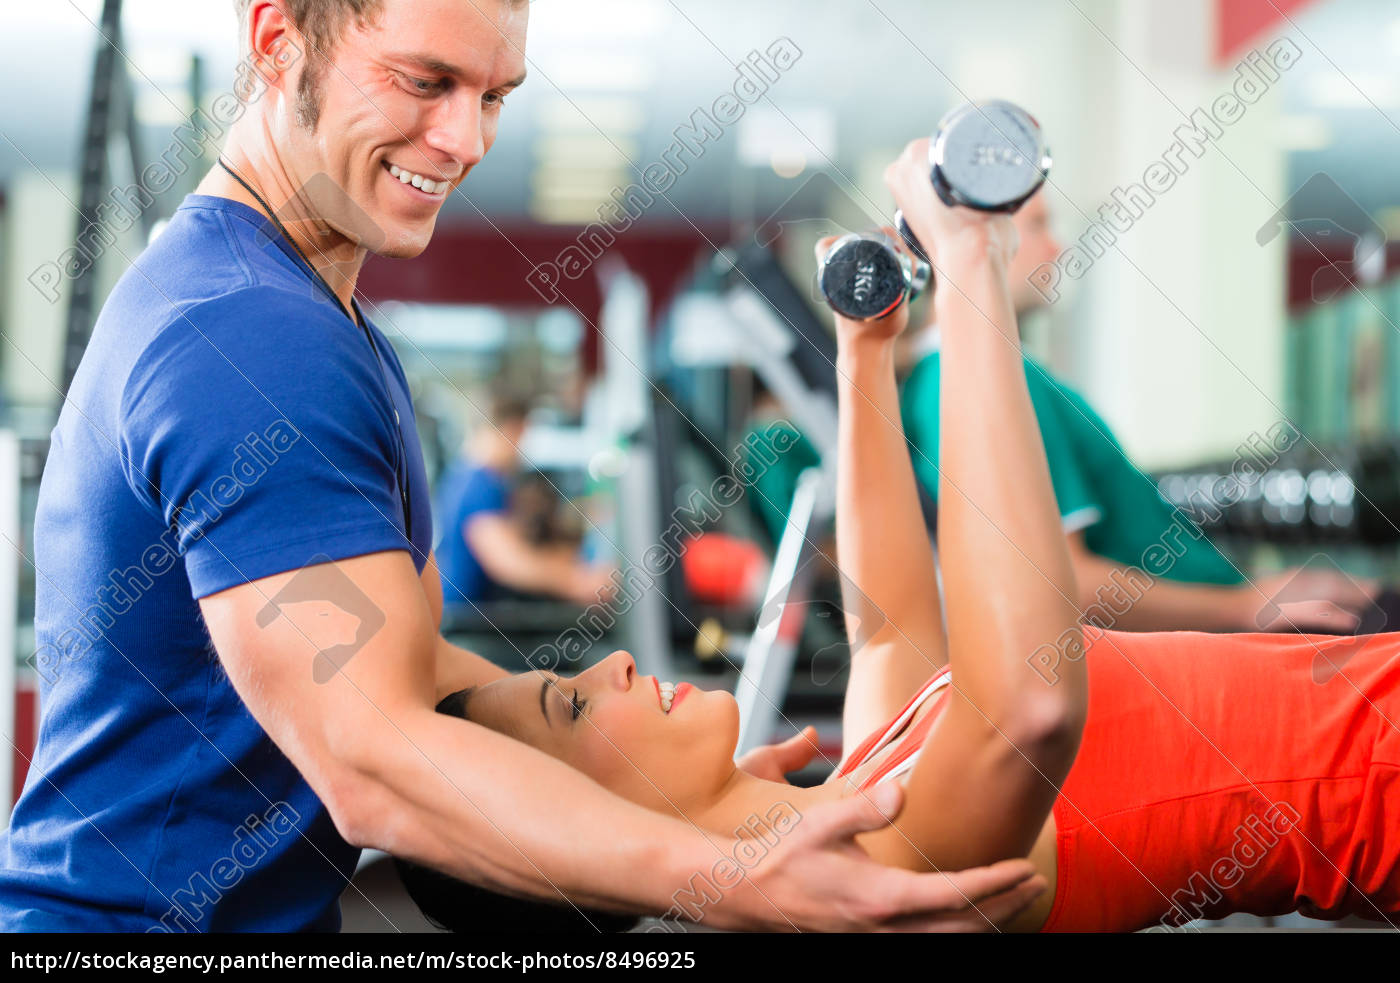 Trainer And Woman In Gym With Dumbbells Stock Photo Panthermedia Stock Agency